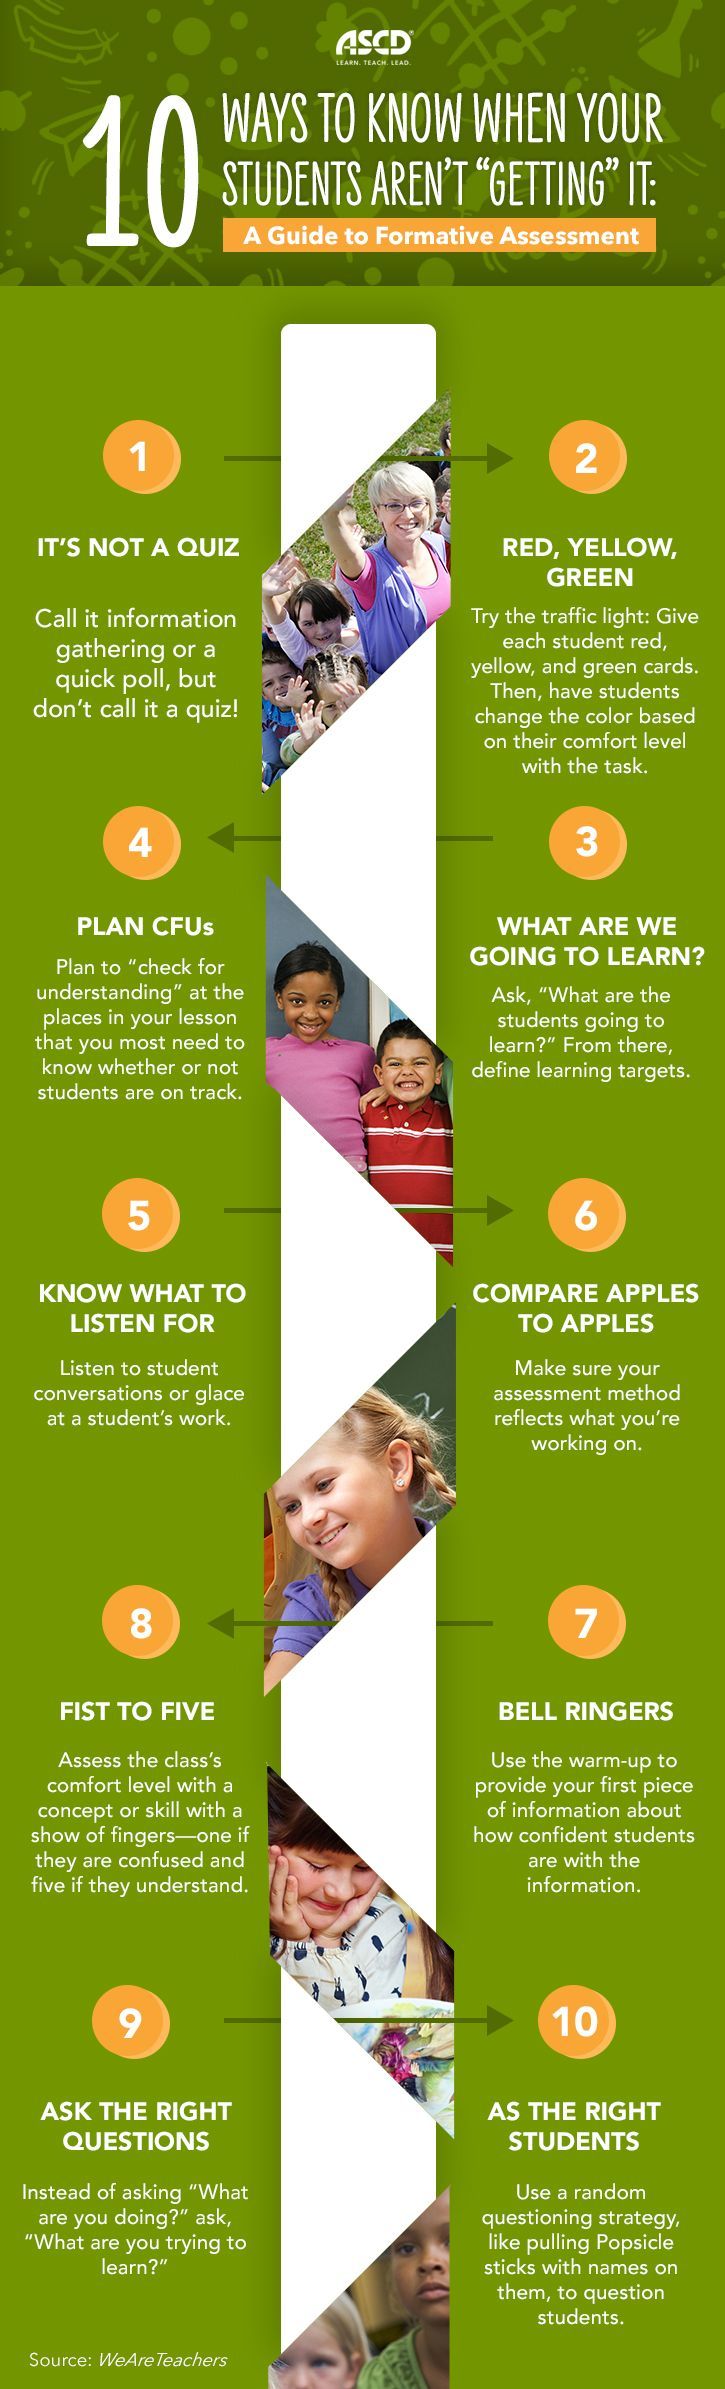 A Guide to Formative Assessment Infographic